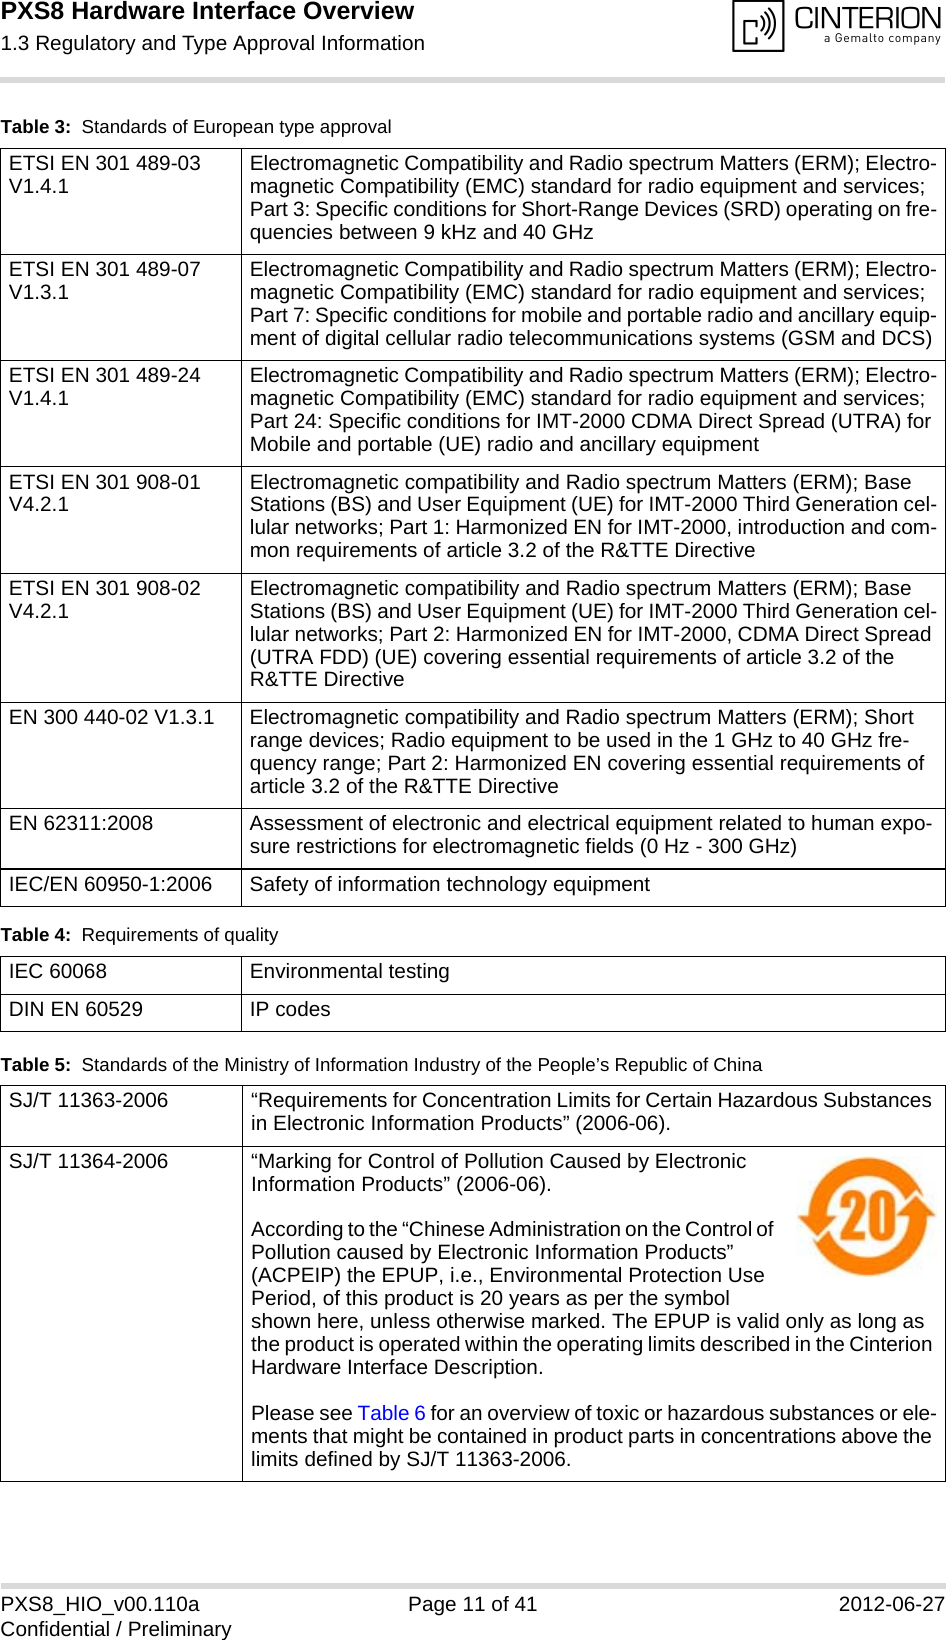 PXS8 Hardware Interface Overview1.3 Regulatory and Type Approval Information15PXS8_HIO_v00.110a Page 11 of 41 2012-06-27Confidential / PreliminaryETSI EN 301 489-03 V1.4.1 Electromagnetic Compatibility and Radio spectrum Matters (ERM); Electro-magnetic Compatibility (EMC) standard for radio equipment and services; Part 3: Specific conditions for Short-Range Devices (SRD) operating on fre-quencies between 9 kHz and 40 GHz ETSI EN 301 489-07 V1.3.1 Electromagnetic Compatibility and Radio spectrum Matters (ERM); Electro-magnetic Compatibility (EMC) standard for radio equipment and services; Part 7: Specific conditions for mobile and portable radio and ancillary equip-ment of digital cellular radio telecommunications systems (GSM and DCS)ETSI EN 301 489-24 V1.4.1 Electromagnetic Compatibility and Radio spectrum Matters (ERM); Electro-magnetic Compatibility (EMC) standard for radio equipment and services; Part 24: Specific conditions for IMT-2000 CDMA Direct Spread (UTRA) for Mobile and portable (UE) radio and ancillary equipmentETSI EN 301 908-01 V4.2.1 Electromagnetic compatibility and Radio spectrum Matters (ERM); Base Stations (BS) and User Equipment (UE) for IMT-2000 Third Generation cel-lular networks; Part 1: Harmonized EN for IMT-2000, introduction and com-mon requirements of article 3.2 of the R&amp;TTE DirectiveETSI EN 301 908-02 V4.2.1 Electromagnetic compatibility and Radio spectrum Matters (ERM); Base Stations (BS) and User Equipment (UE) for IMT-2000 Third Generation cel-lular networks; Part 2: Harmonized EN for IMT-2000, CDMA Direct Spread (UTRA FDD) (UE) covering essential requirements of article 3.2 of the R&amp;TTE DirectiveEN 300 440-02 V1.3.1  Electromagnetic compatibility and Radio spectrum Matters (ERM); Short range devices; Radio equipment to be used in the 1 GHz to 40 GHz fre-quency range; Part 2: Harmonized EN covering essential requirements of article 3.2 of the R&amp;TTE Directive EN 62311:2008 Assessment of electronic and electrical equipment related to human expo-sure restrictions for electromagnetic fields (0 Hz - 300 GHz)IEC/EN 60950-1:2006 Safety of information technology equipmentTable 4:  Requirements of qualityIEC 60068 Environmental testingDIN EN 60529 IP codesTable 5:  Standards of the Ministry of Information Industry of the People’s Republic of ChinaSJ/T 11363-2006  “Requirements for Concentration Limits for Certain Hazardous Substances in Electronic Information Products” (2006-06).SJ/T 11364-2006 “Marking for Control of Pollution Caused by Electronic Information Products” (2006-06).According to the “Chinese Administration on the Control of Pollution caused by Electronic Information Products” (ACPEIP) the EPUP, i.e., Environmental Protection Use Period, of this product is 20 years as per the symbol shown here, unless otherwise marked. The EPUP is valid only as long as the product is operated within the operating limits described in the Cinterion Hardware Interface Description.Please see Table 6 for an overview of toxic or hazardous substances or ele-ments that might be contained in product parts in concentrations above the limits defined by SJ/T 11363-2006. Table 3:  Standards of European type approval